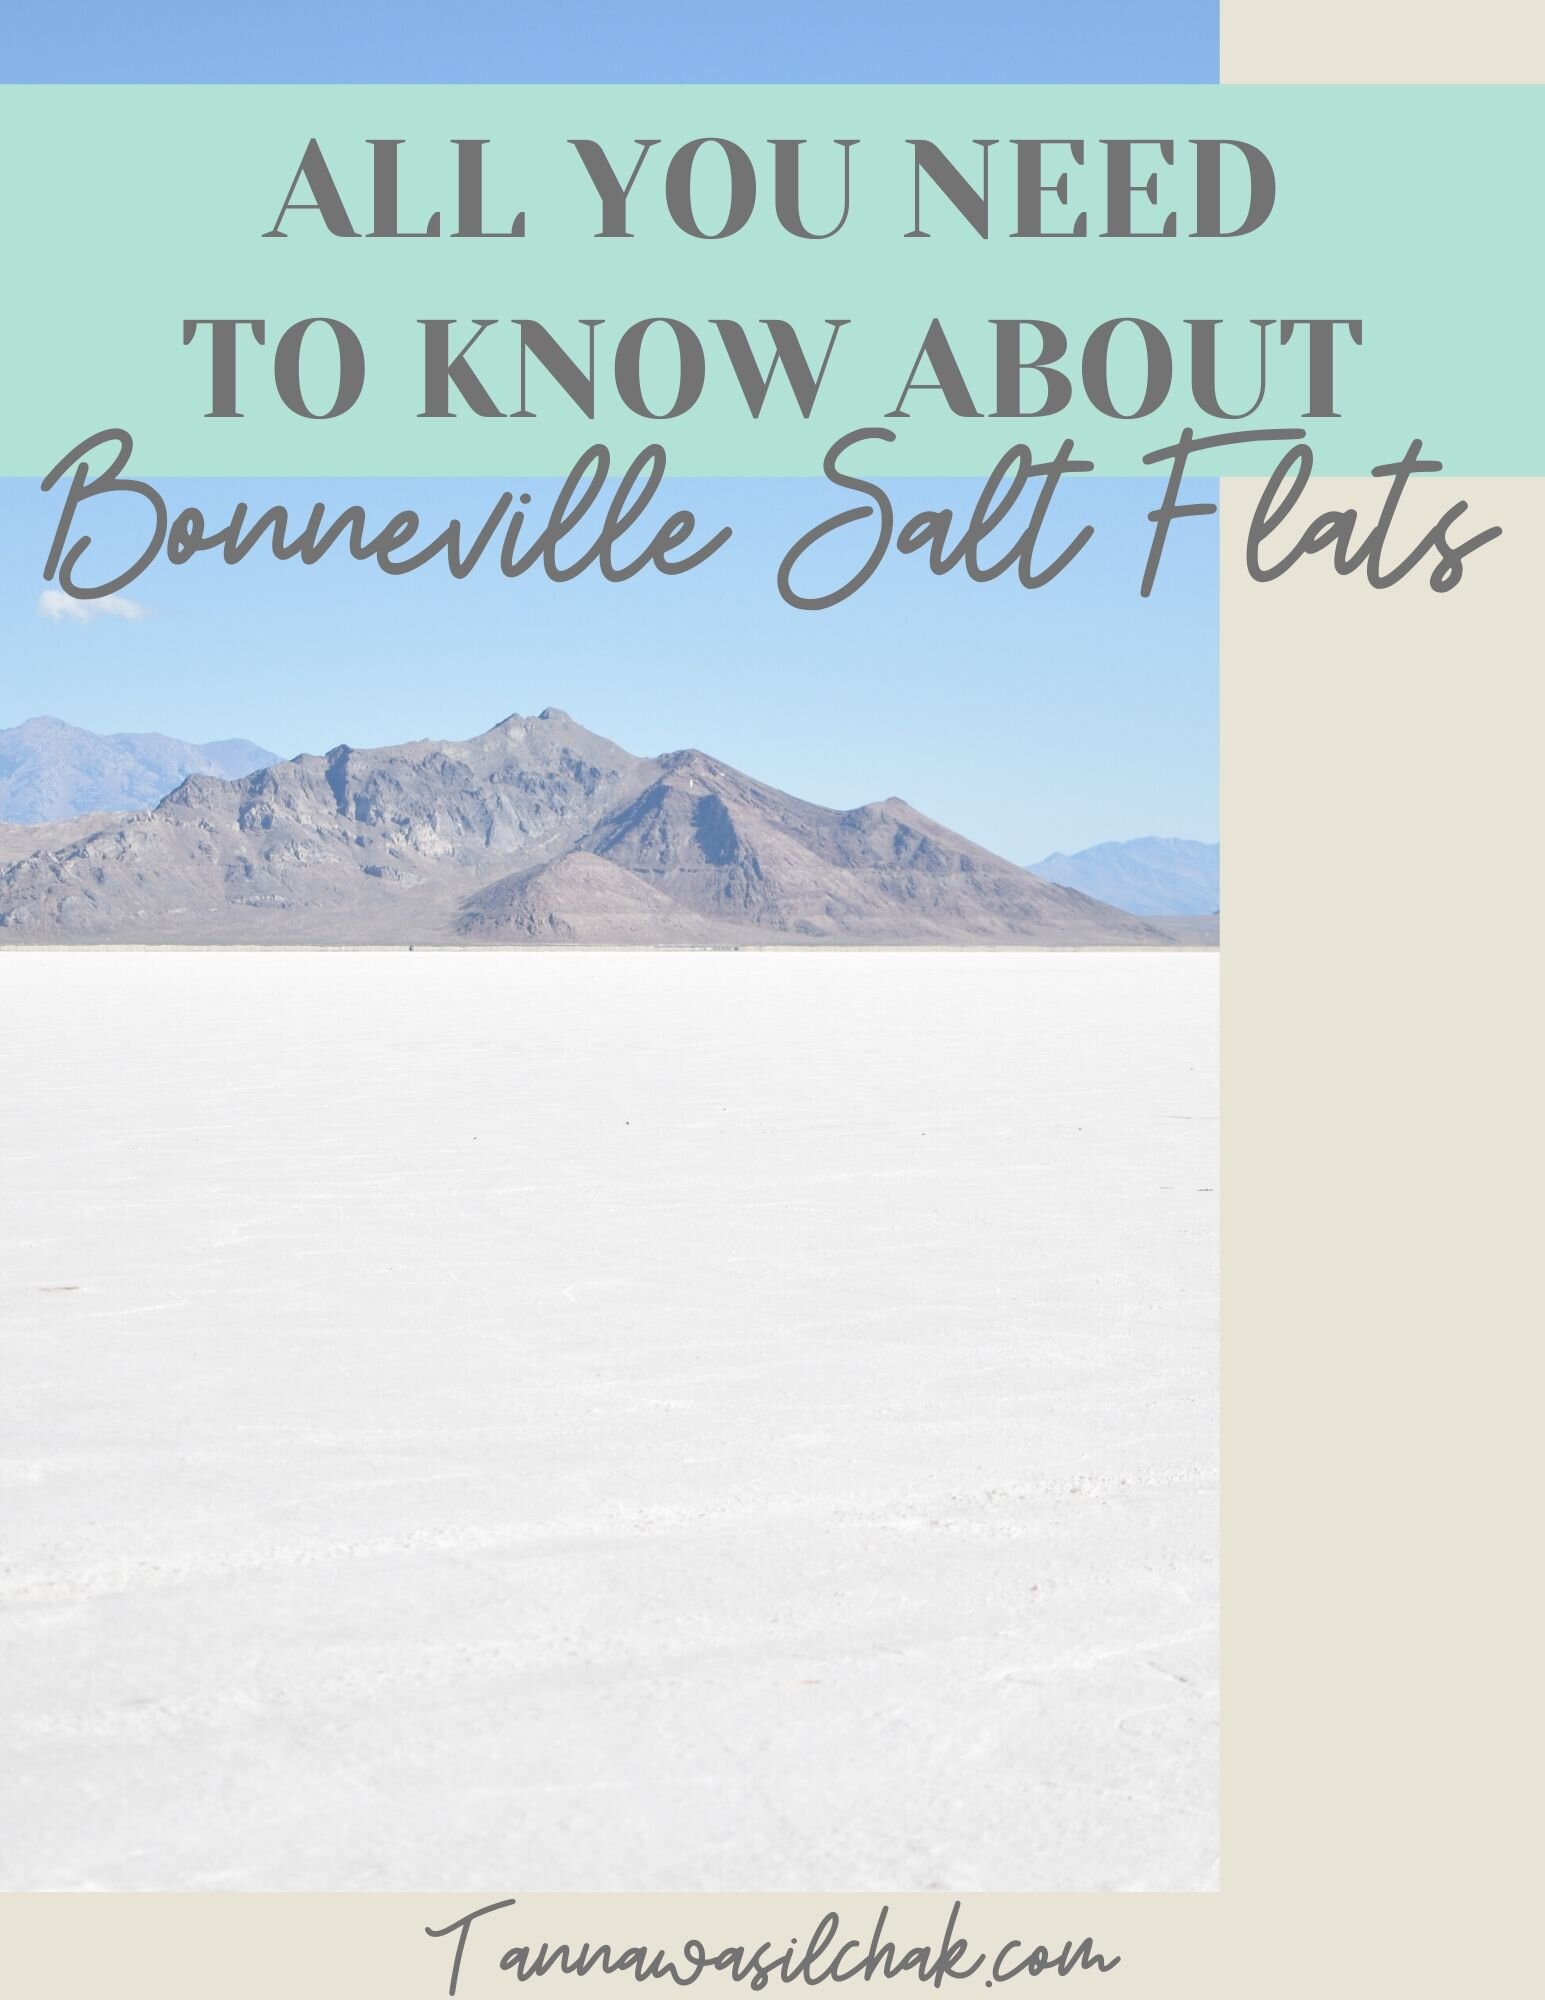 EVERYTHING YOU NEED TO KNOW ABOUT BONNEVILLE SALT FLATS (3).jpg